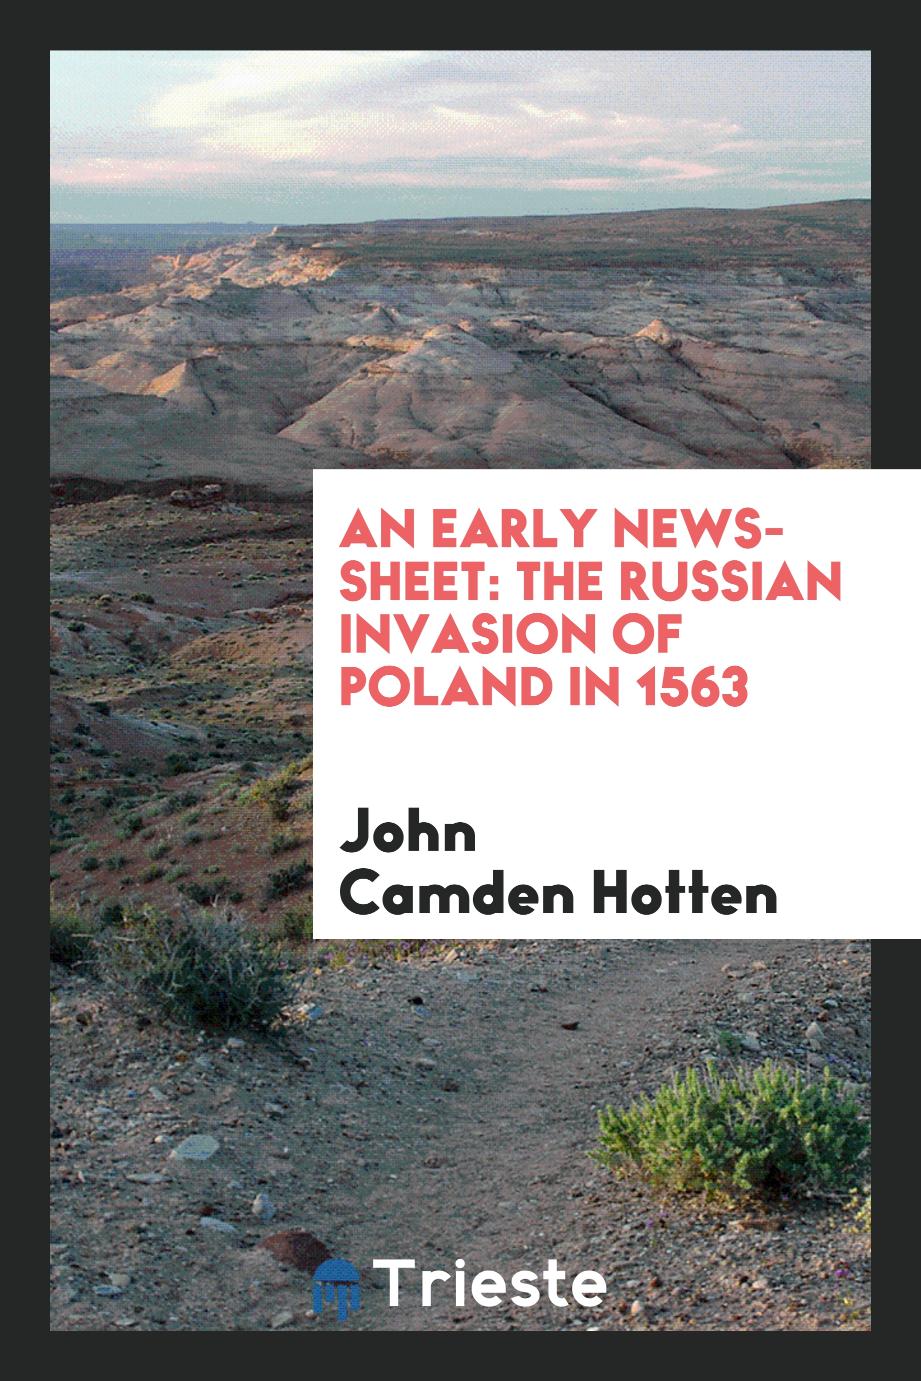 An Early News-sheet: The Russian Invasion of Poland in 1563